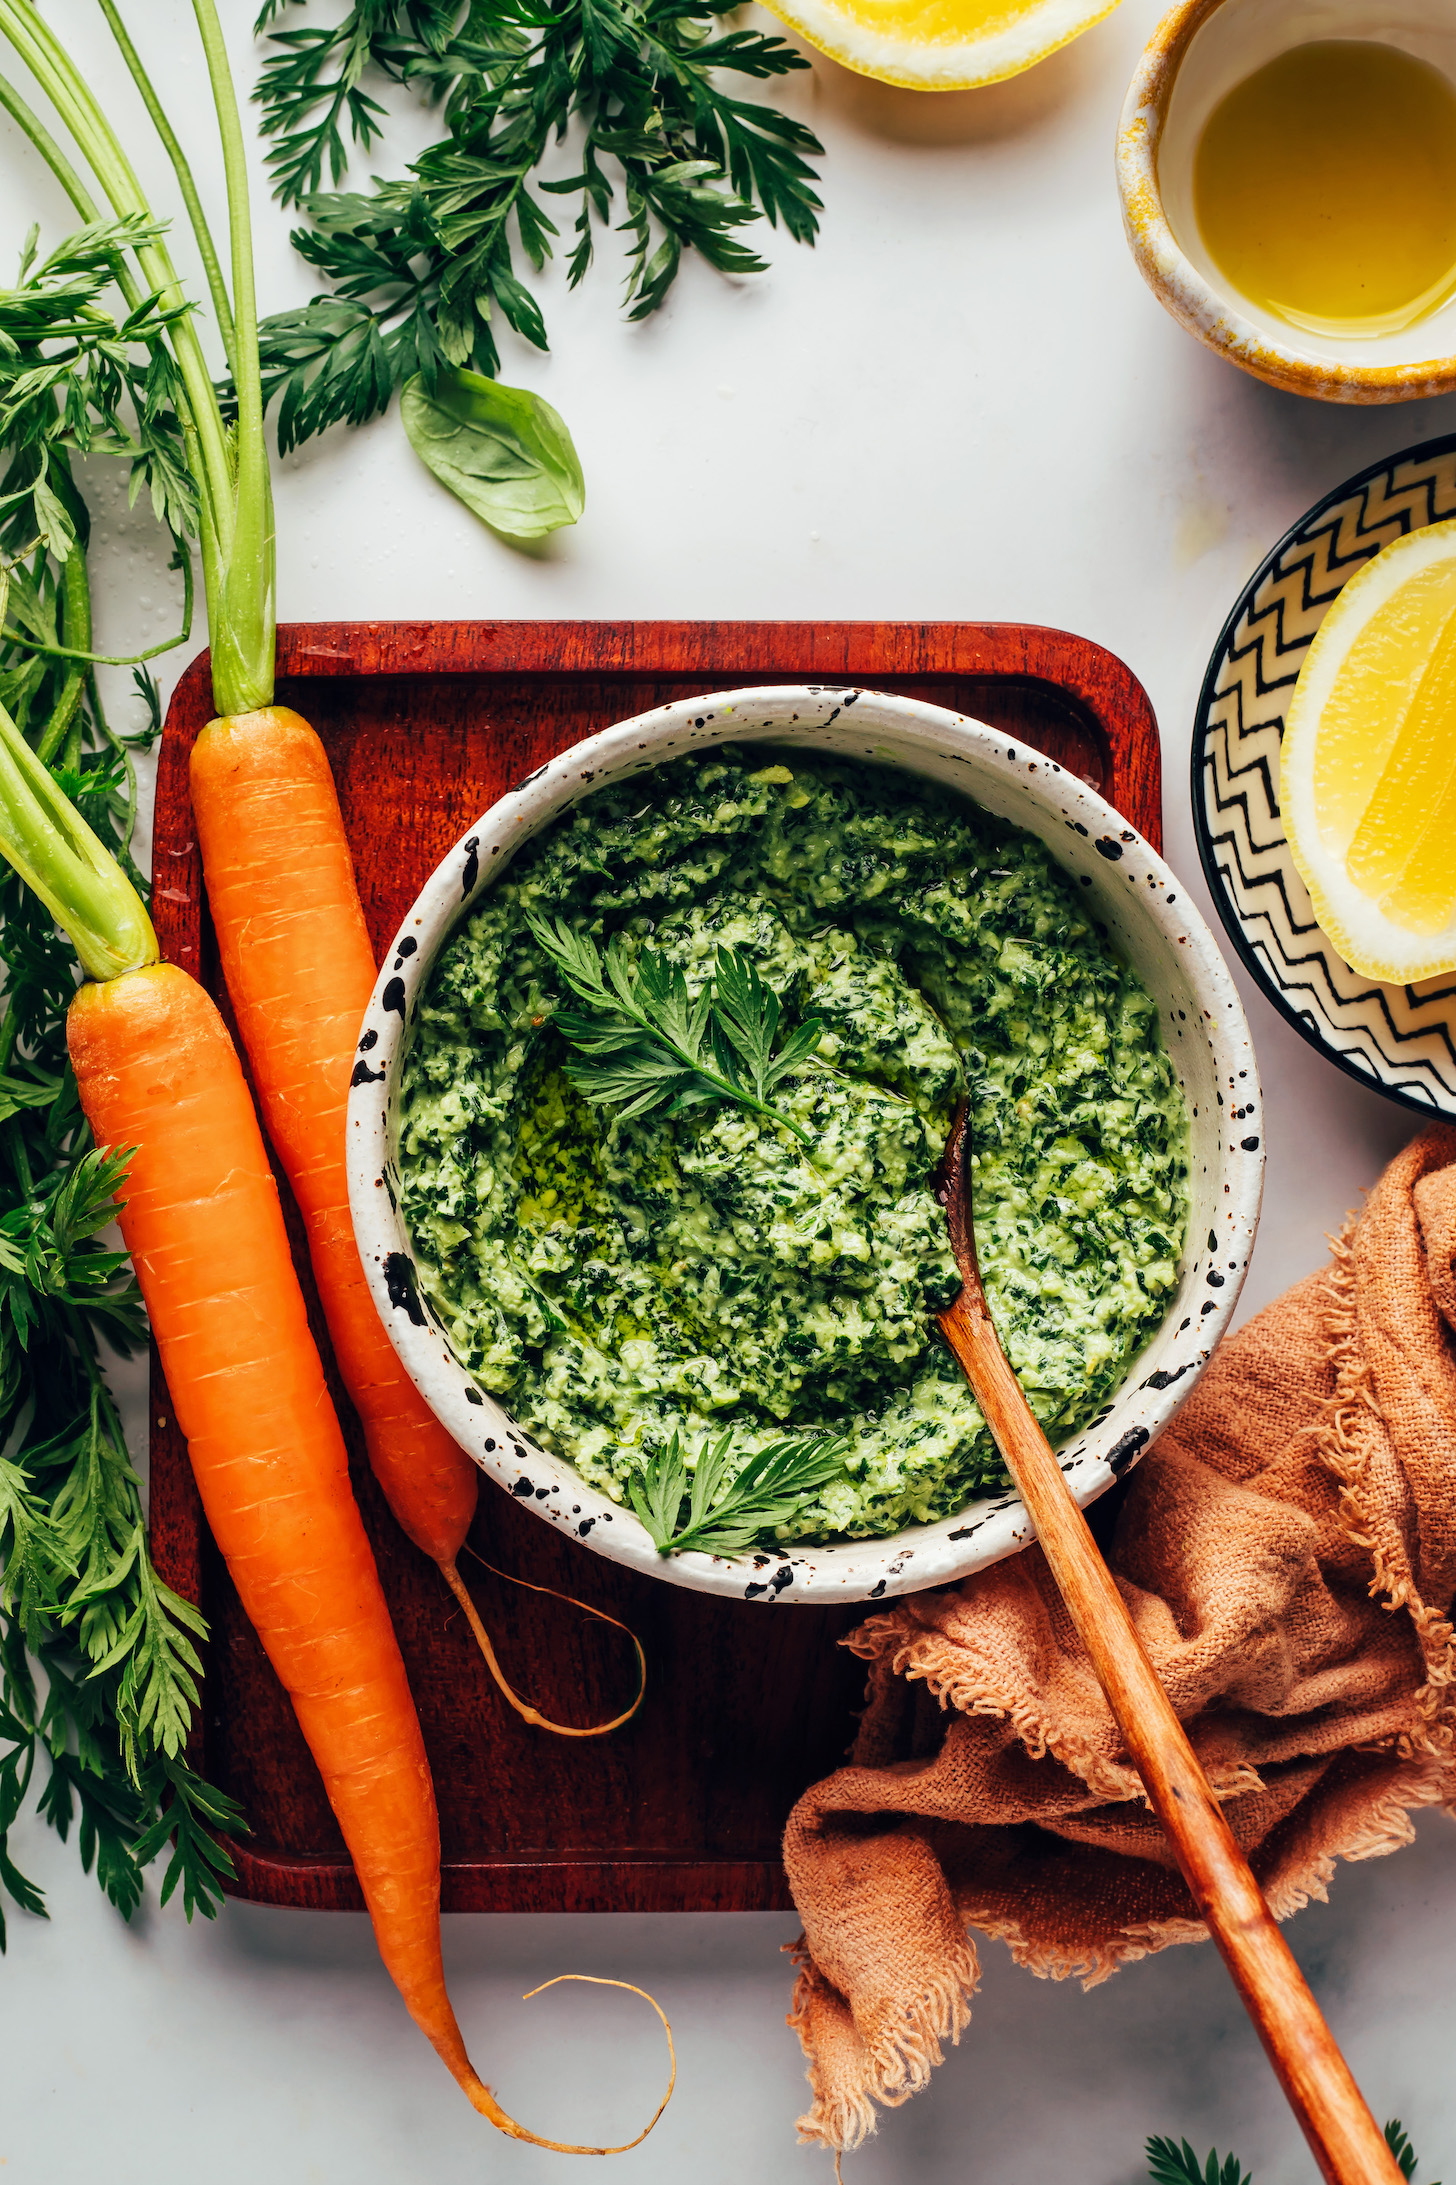 Lemons, olive oil, carrots with tops, and a bowl of carrot top pesto